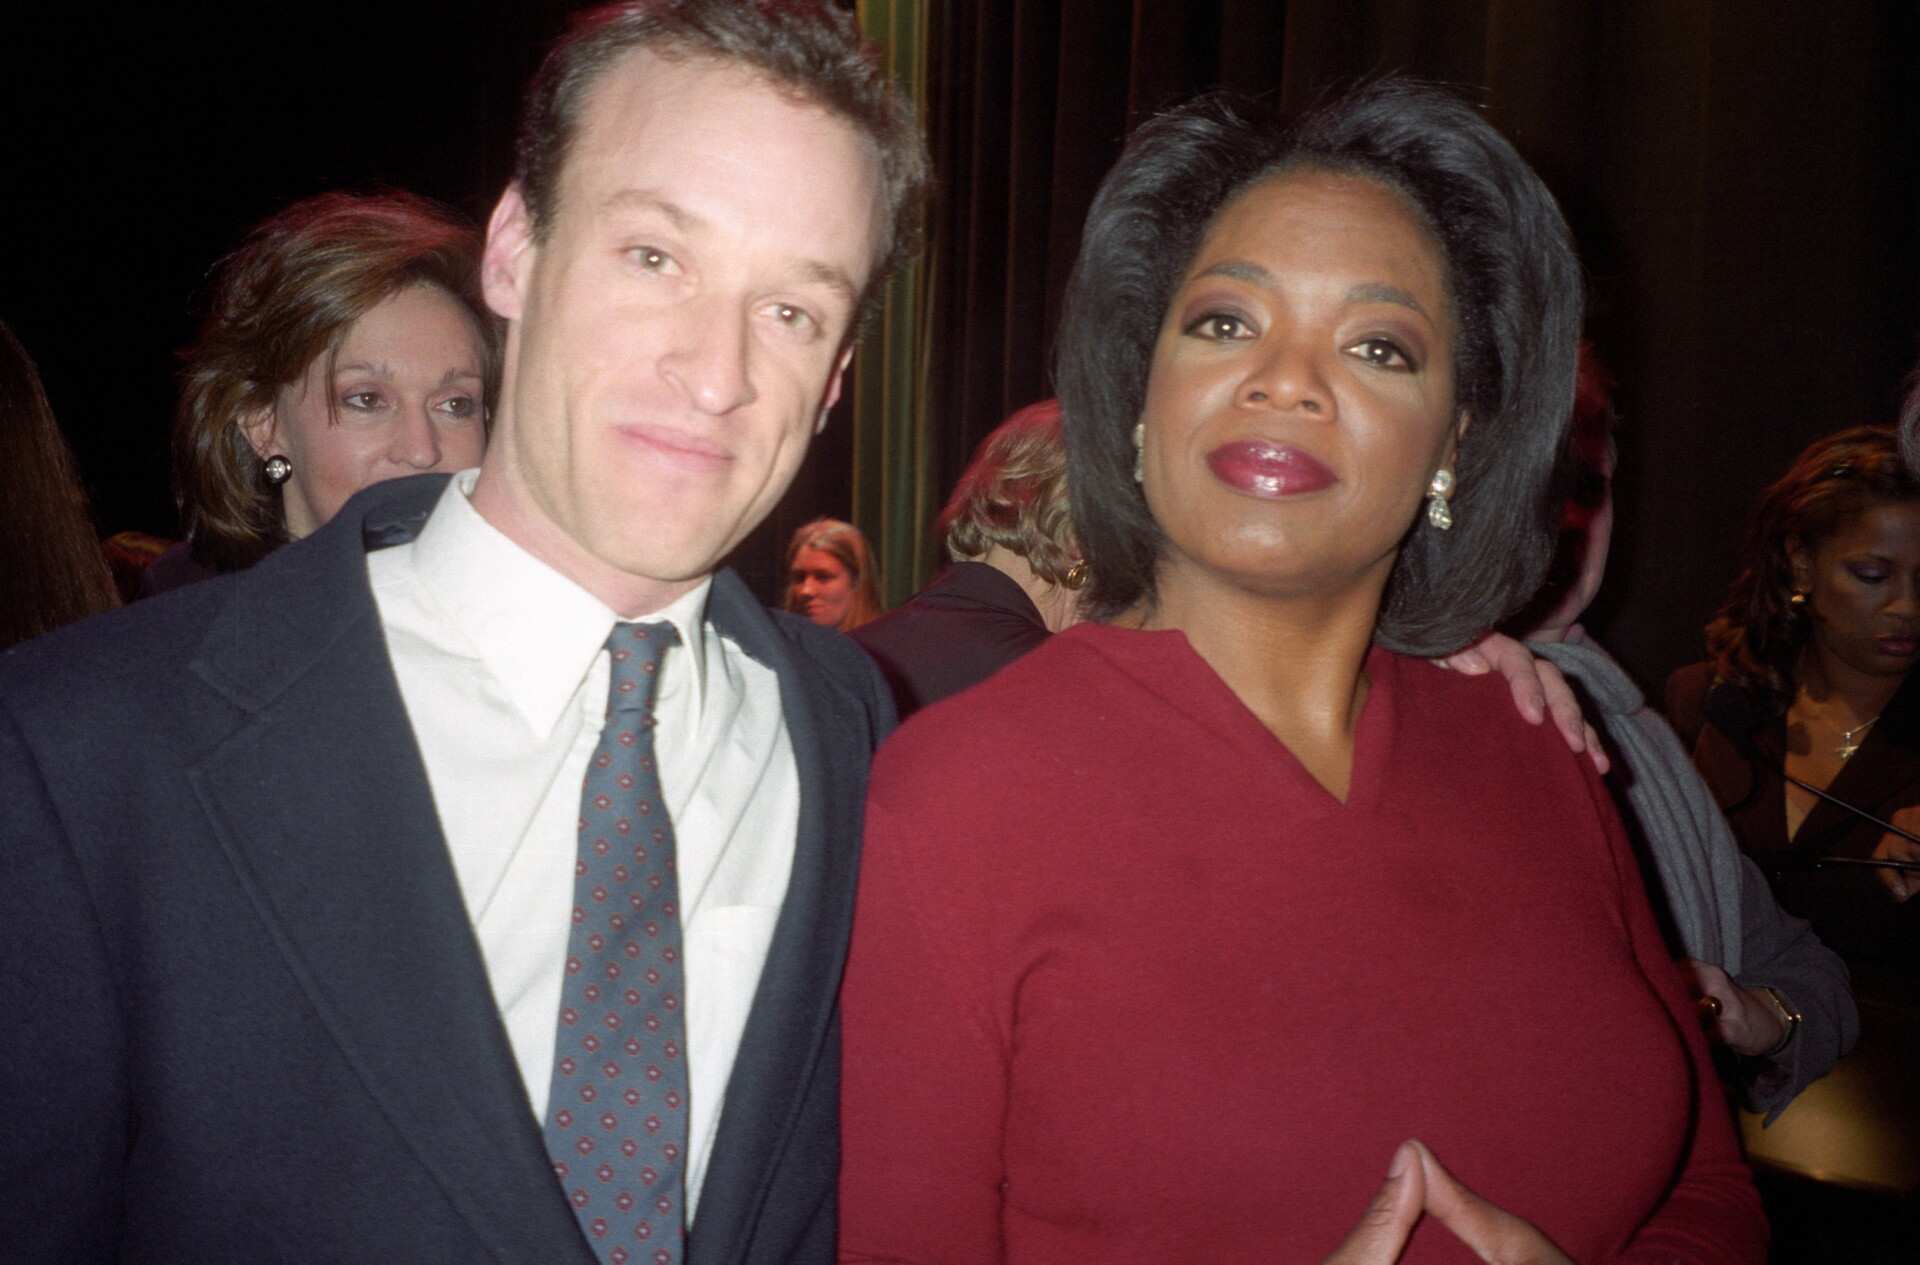 A photo of a white man in a grey suit posed next to Oprah Winfrey